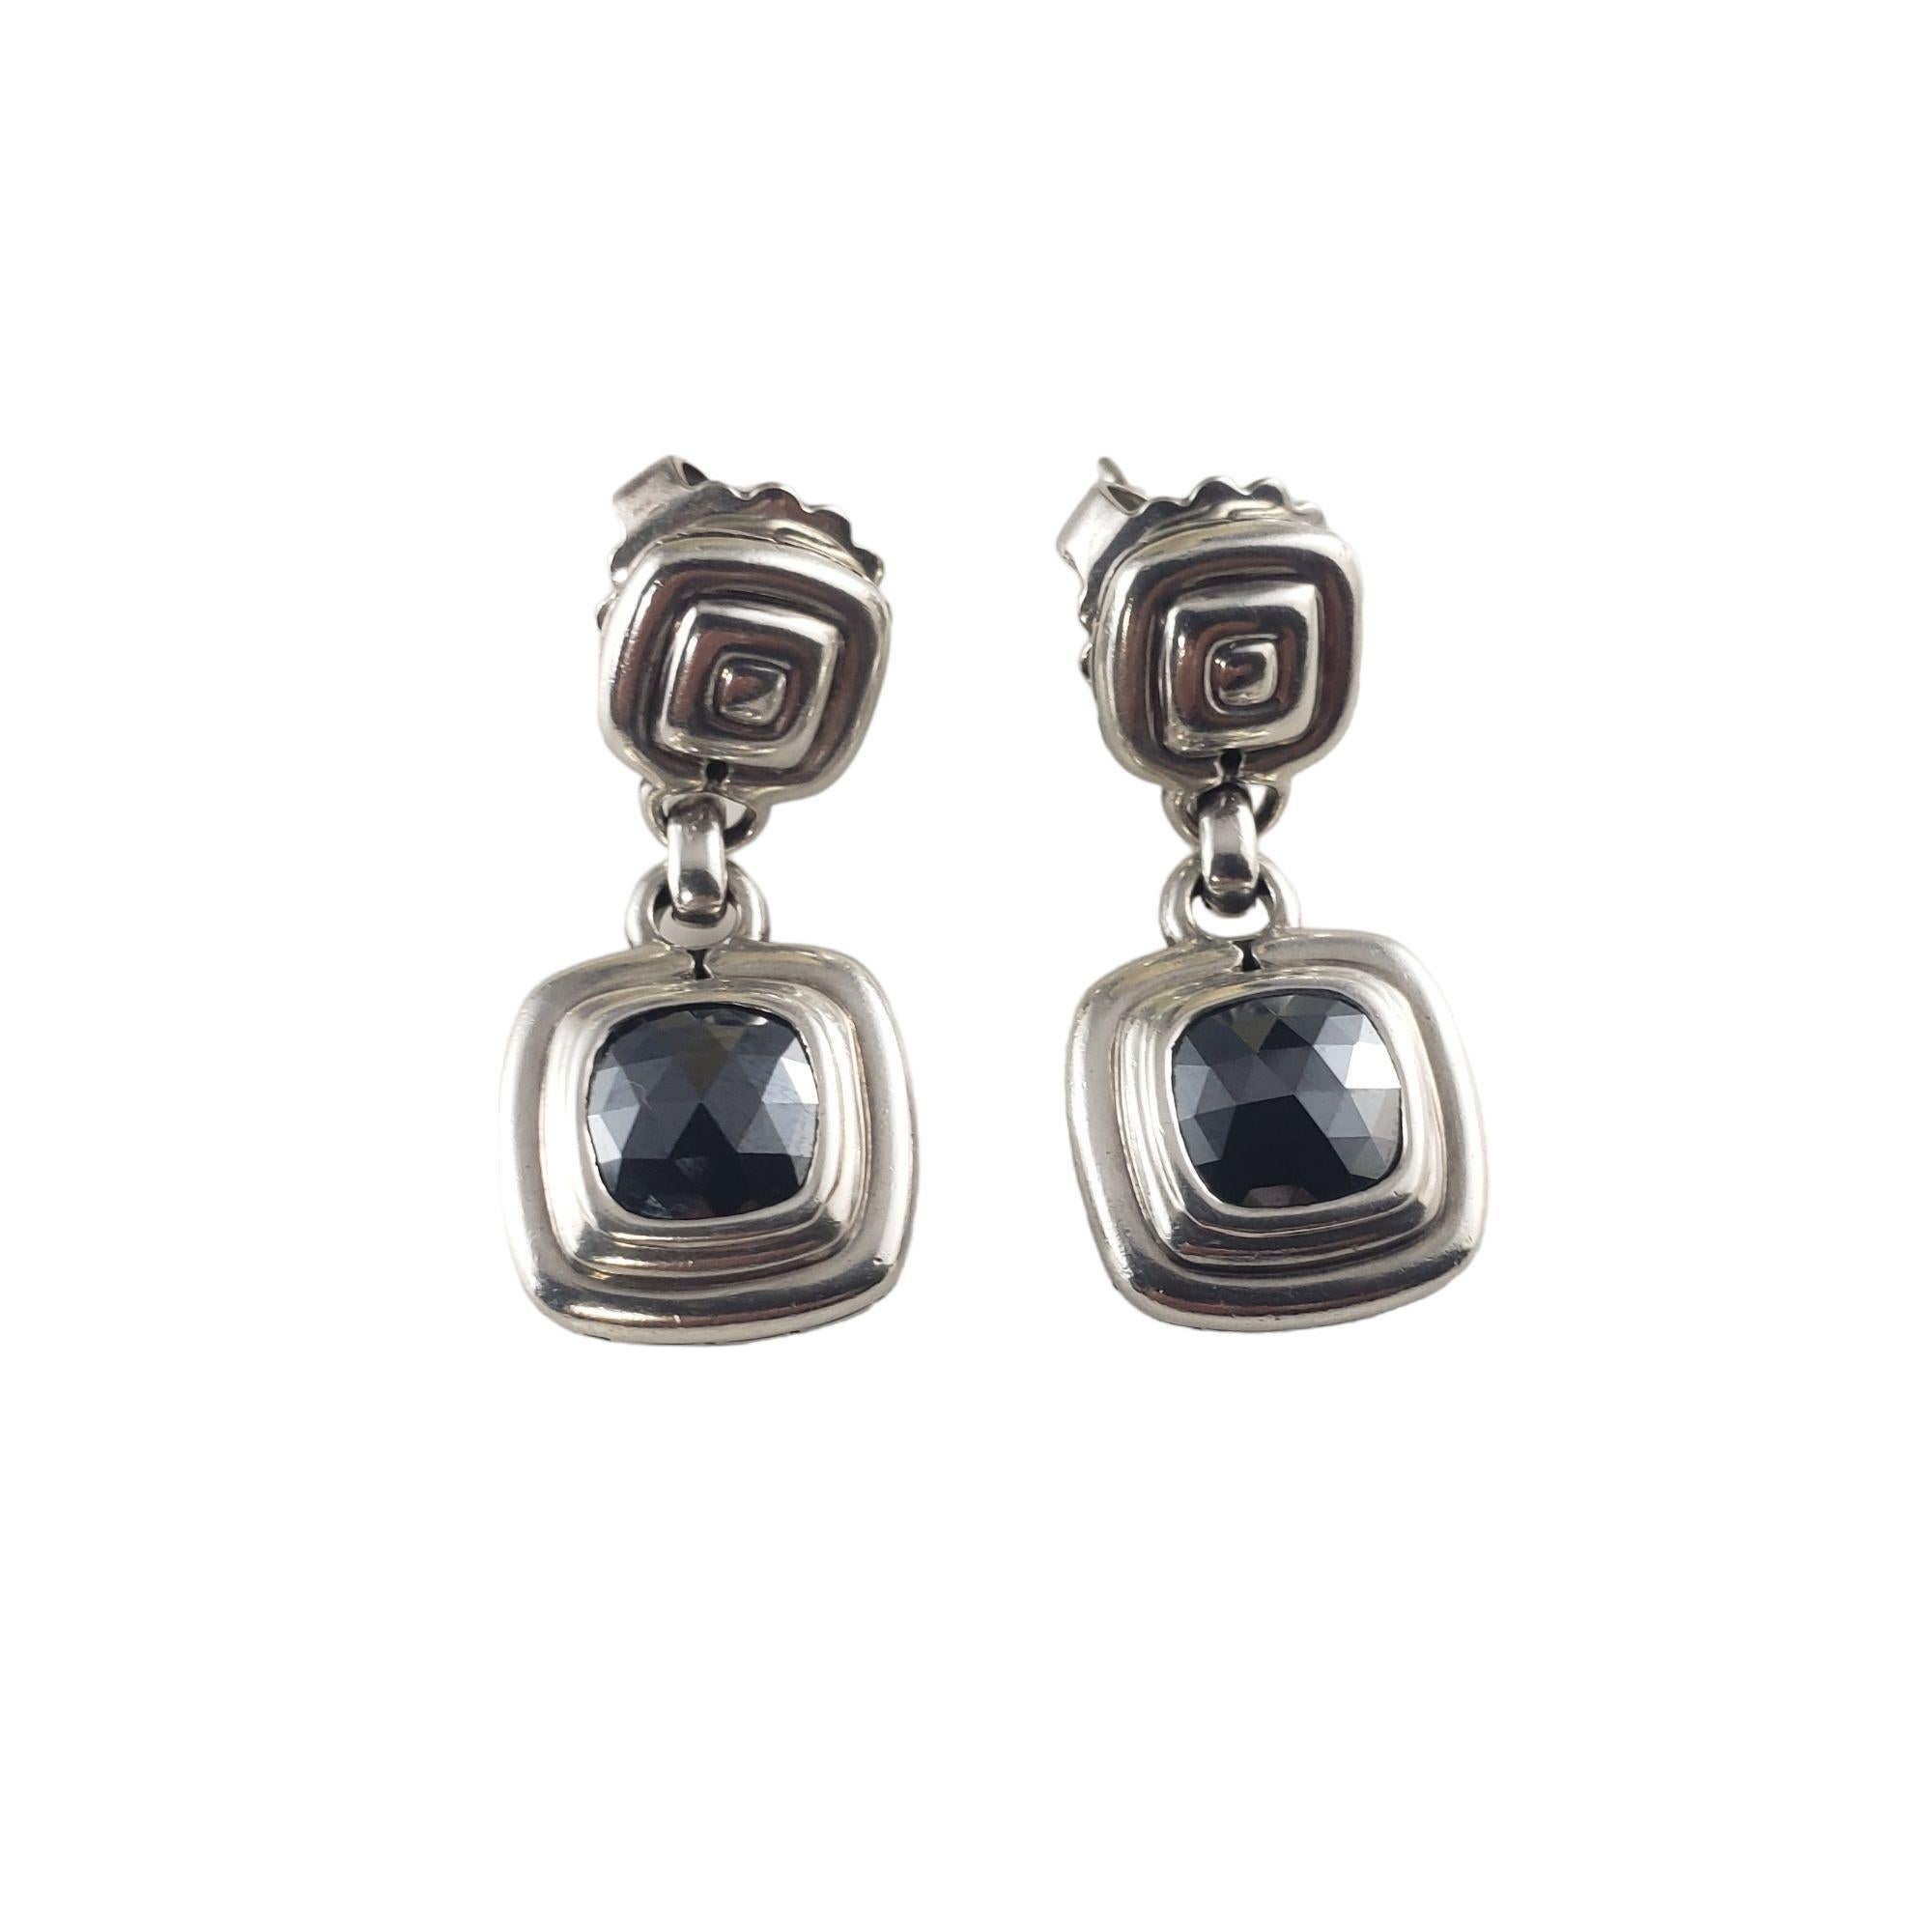 John Hardy Sterling Silver and Hematite Dangle Earrings-

These elegant earrings by John Hardy each feature one faceted hematite stone (7 mm x 7 mm) set in beautifully detailed sterling silver. Push back closures.

Size: 28 mm x 13 mm

Weight: 5.7